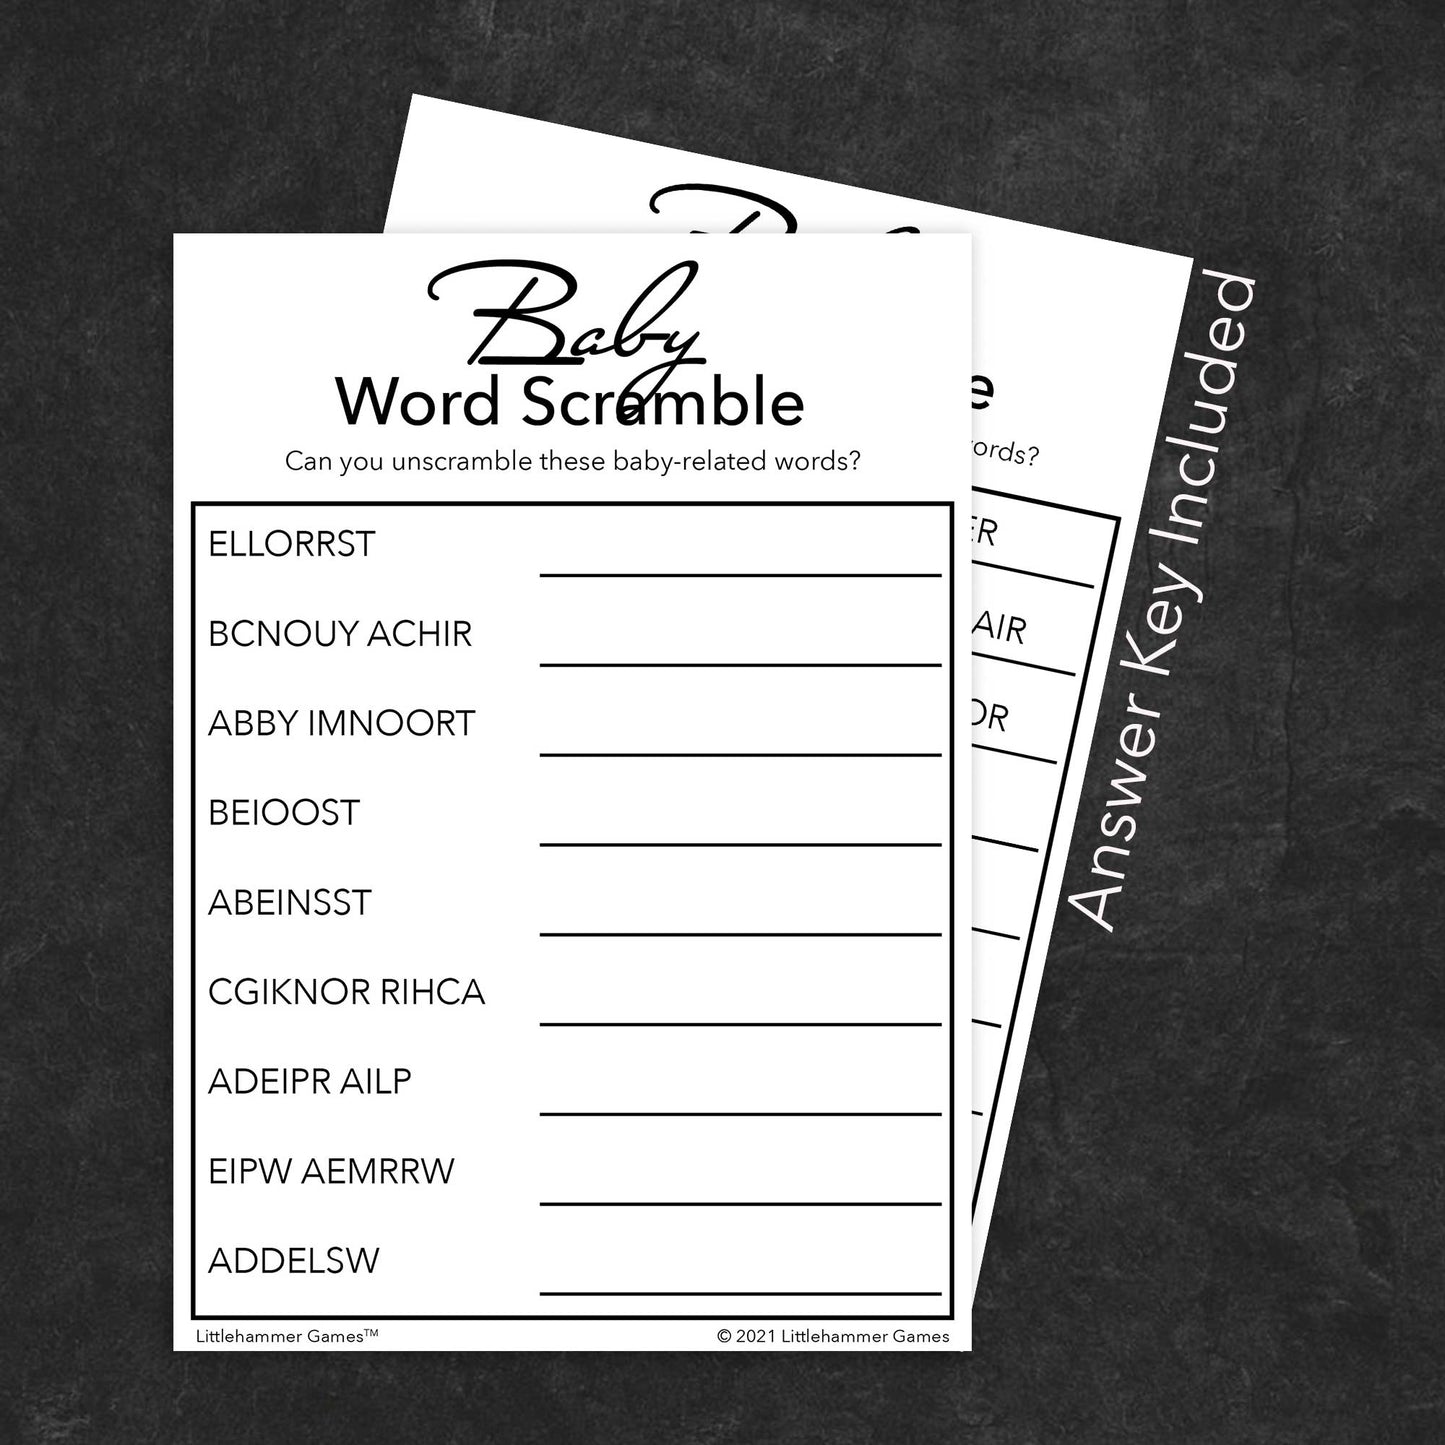 Baby Word Scramble game card with black text on a white background with answer card tucked behind it on a slate background with white text that says "Answer Key Included"